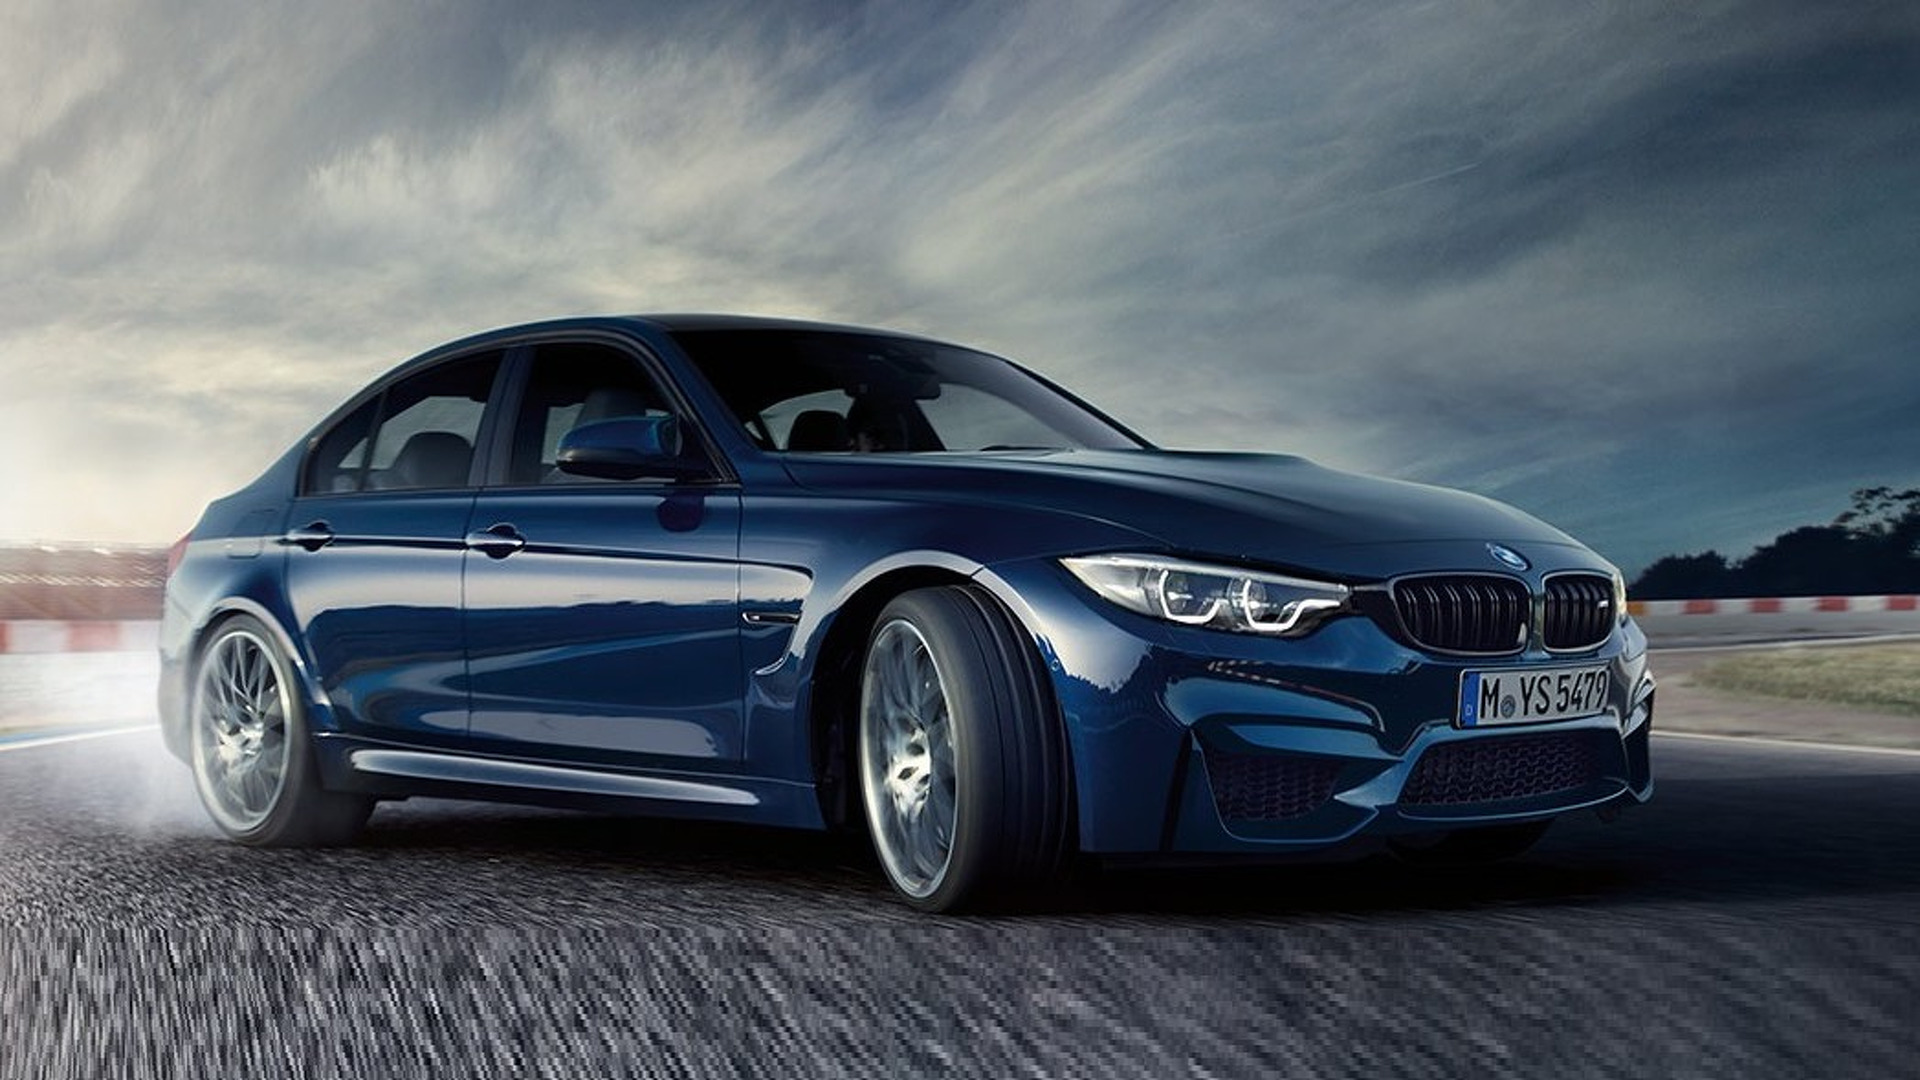 Bmw M3 Revealed With Discreet Facelift